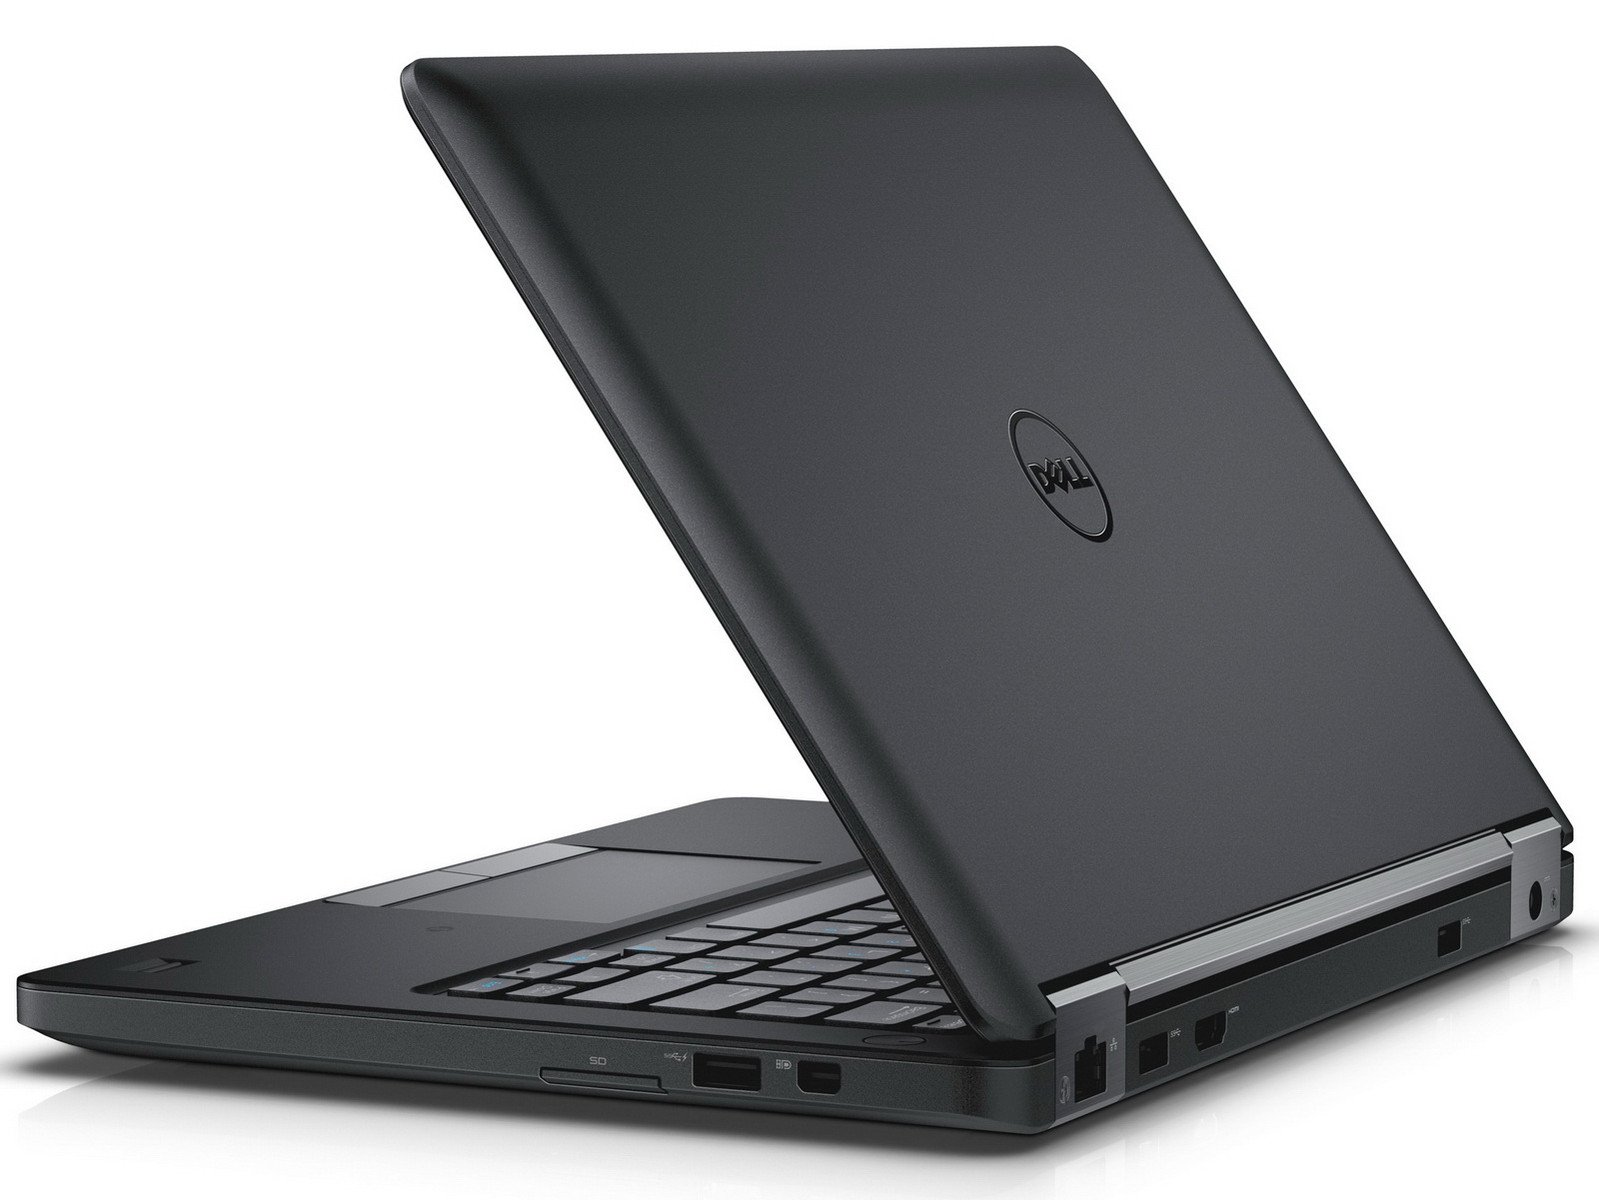 Dell unveils refreshed Latitude 5000 Series notebooks with improved